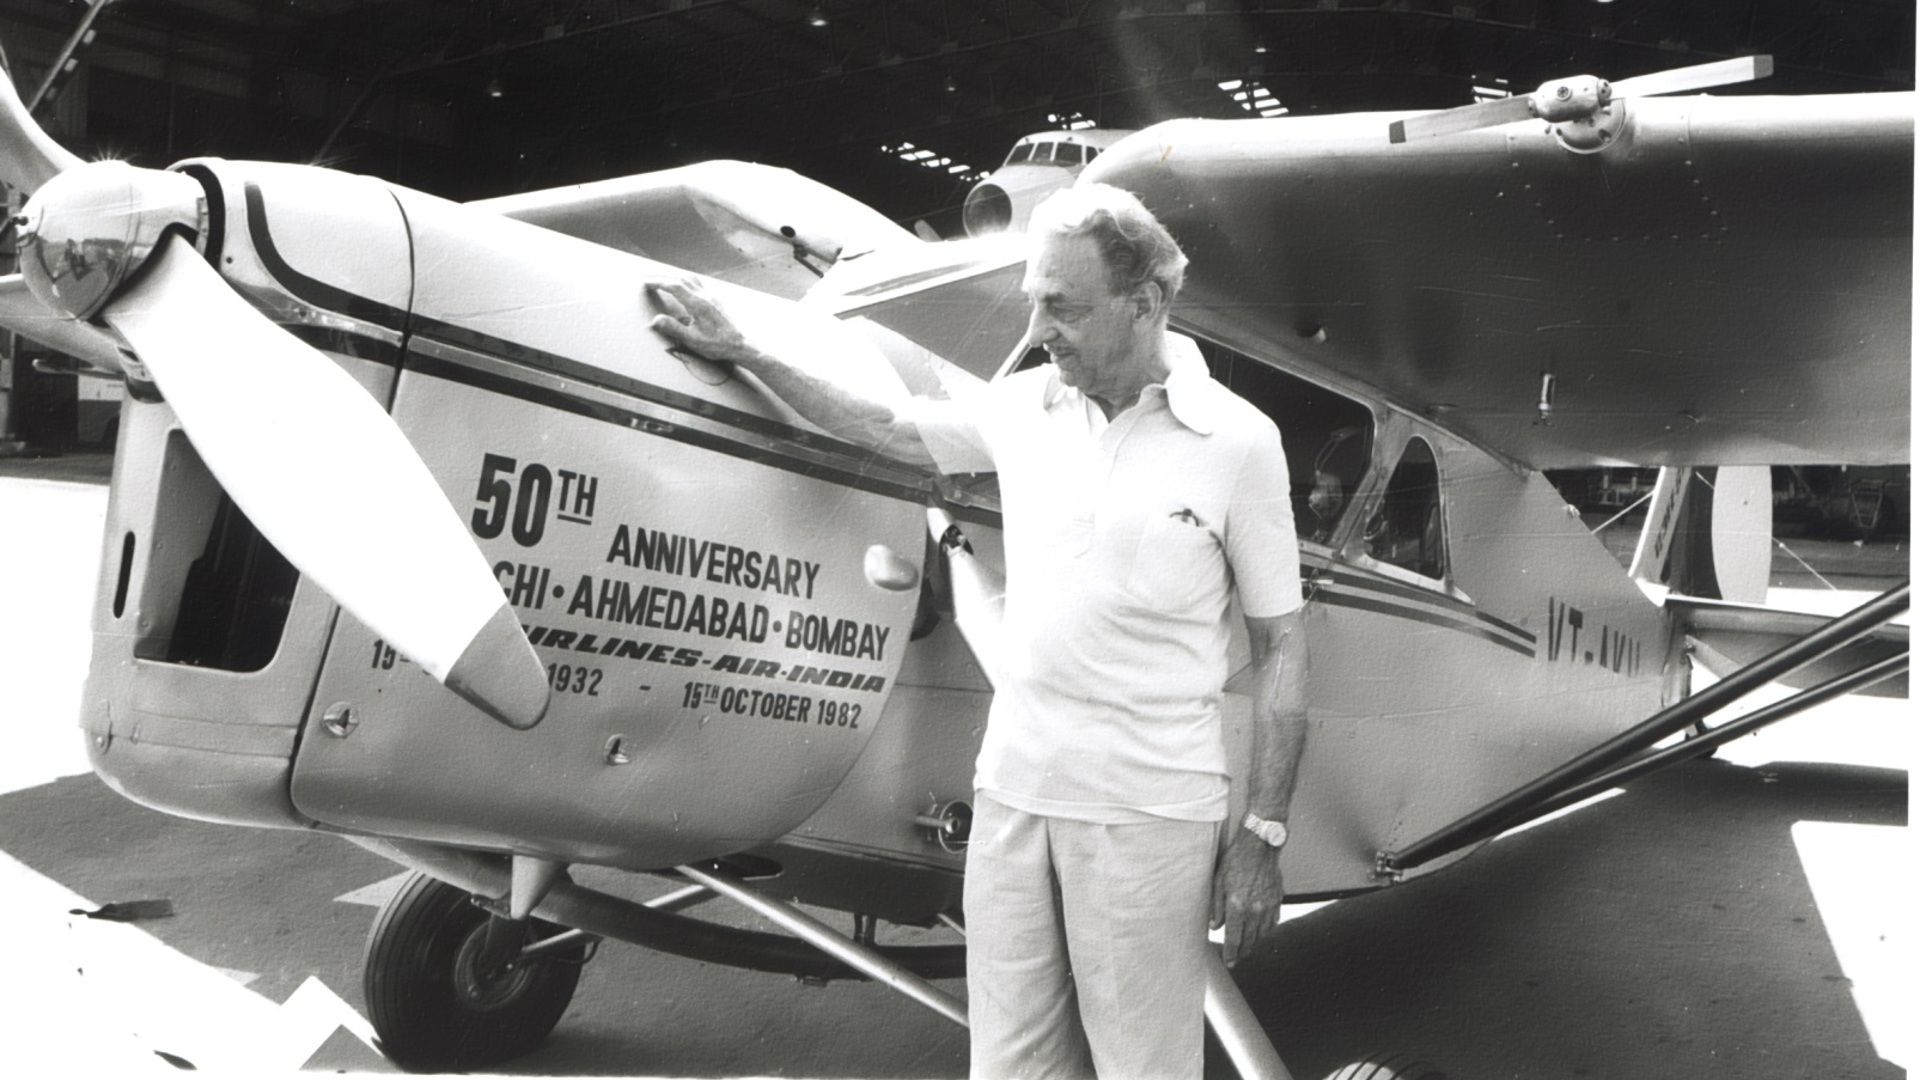 JRD Tata - The First Person To Obtain A Commercial Pilot License In India